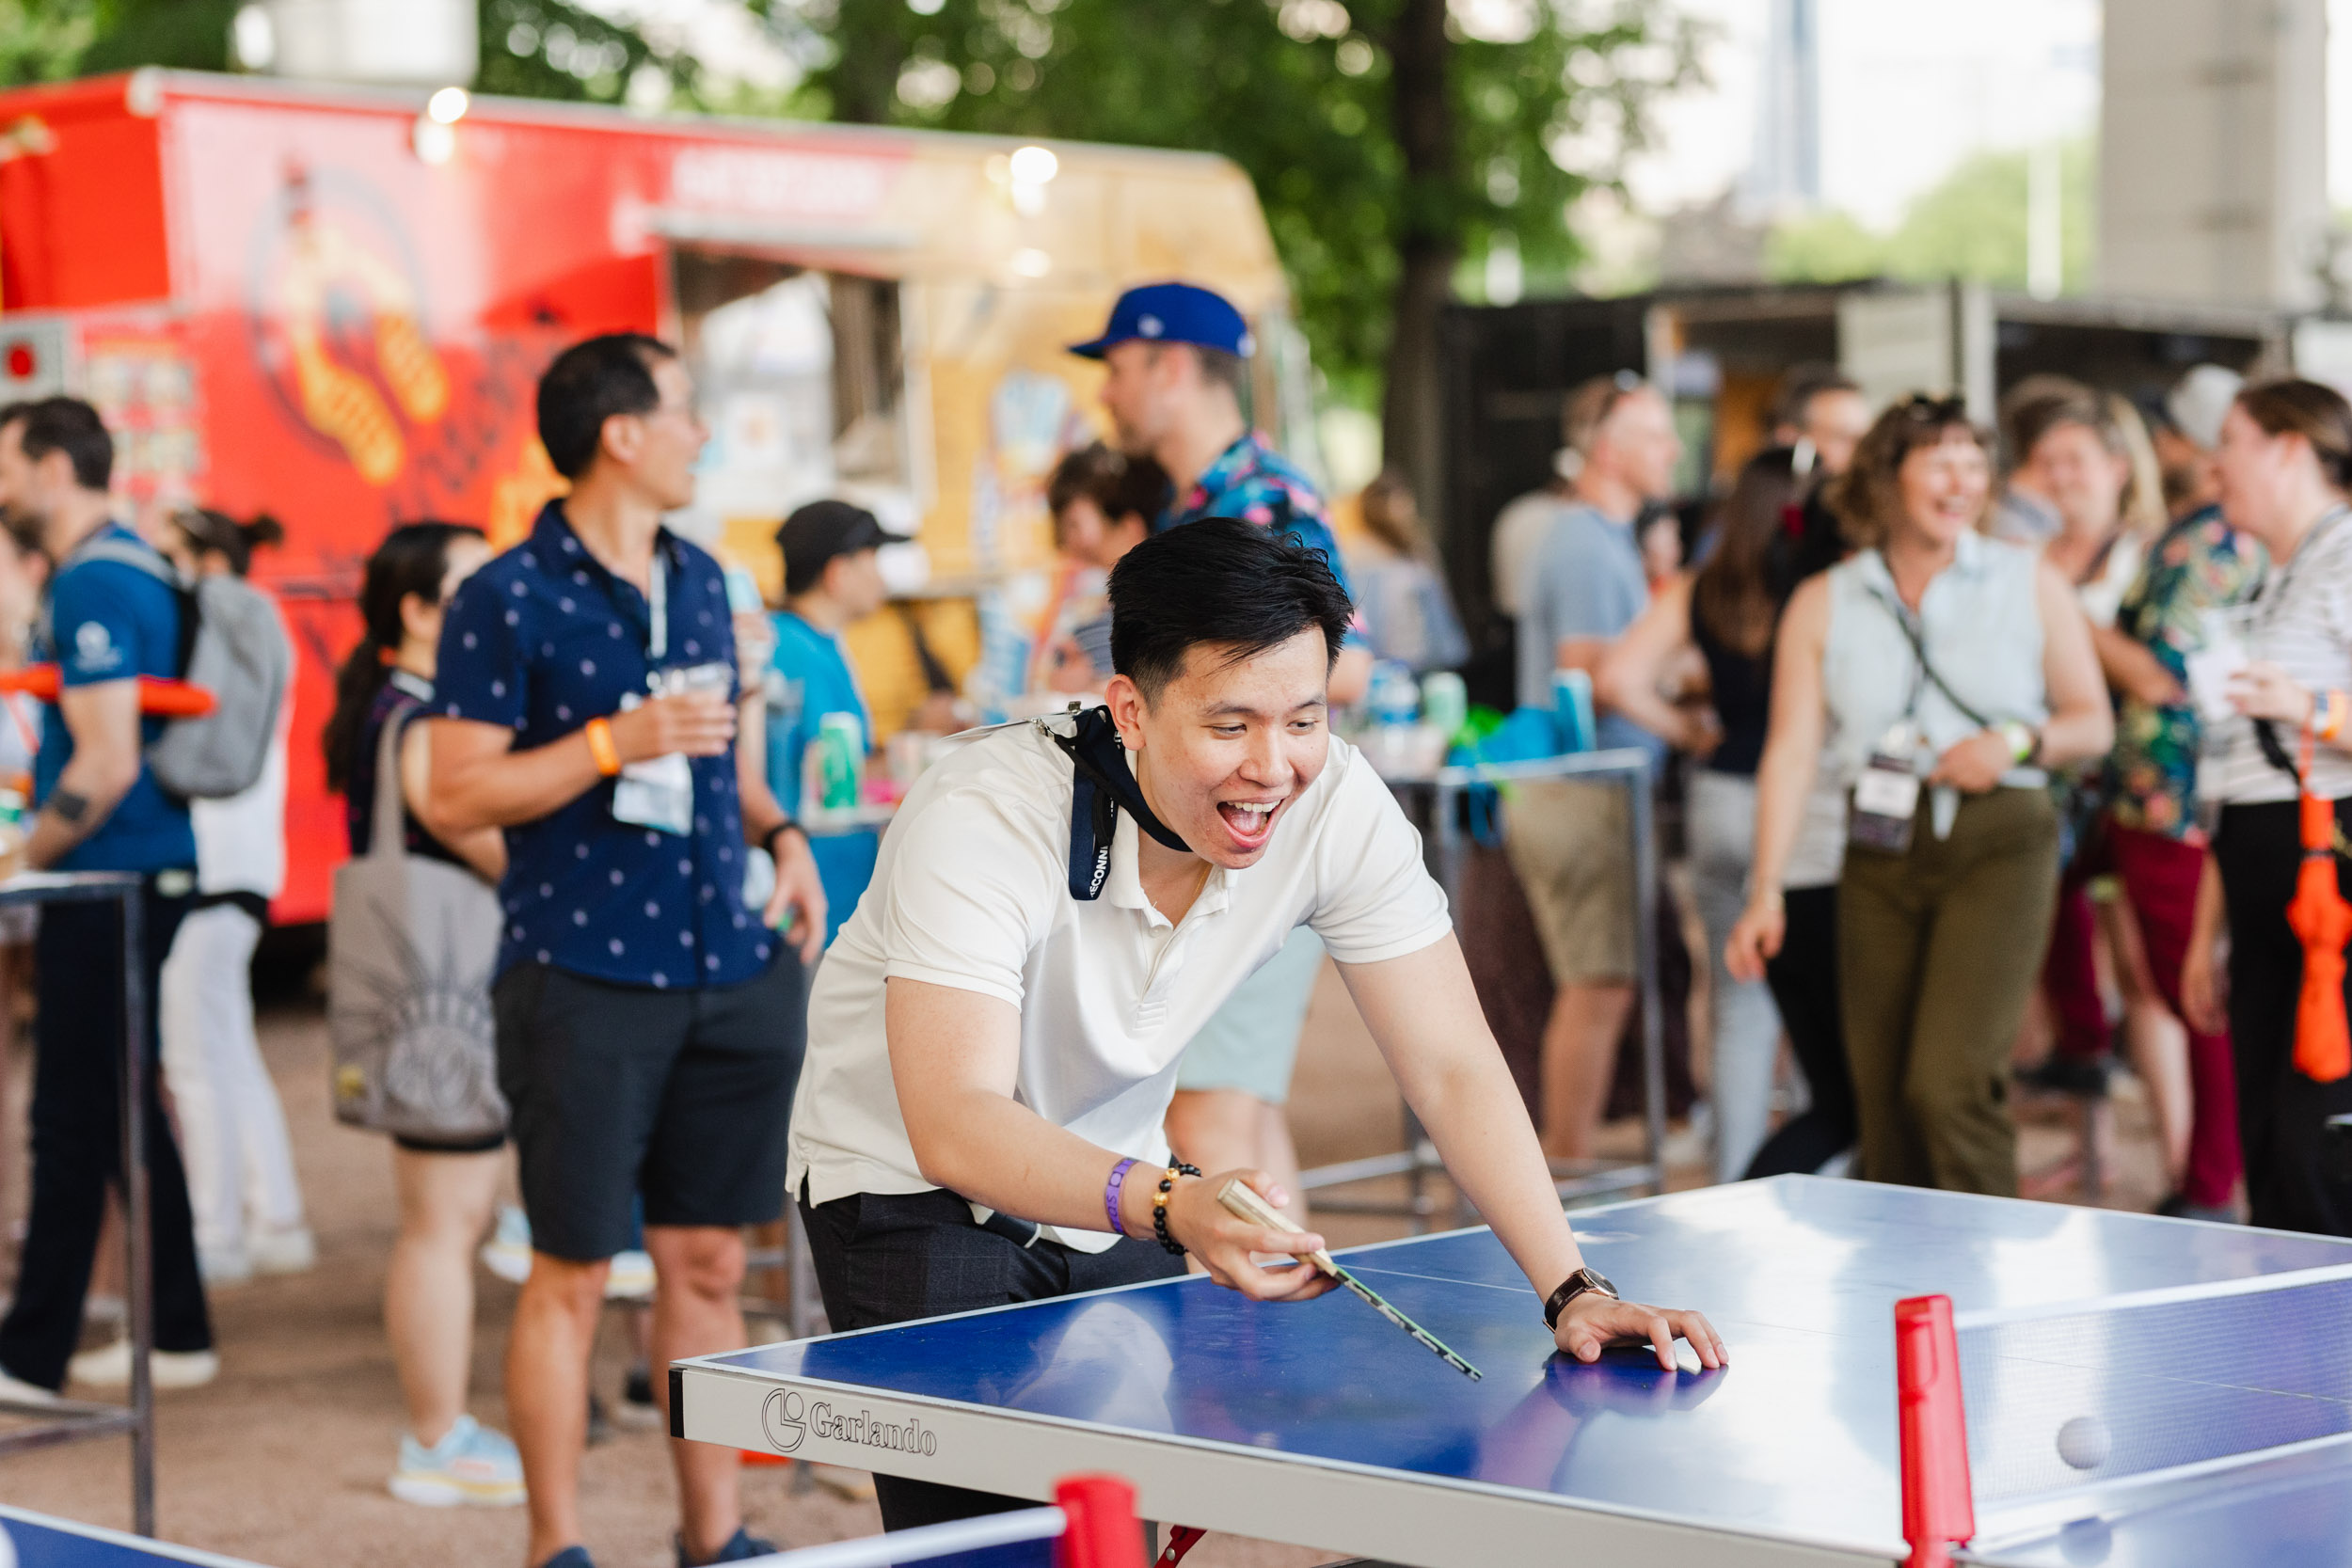 Photographer capturing a man playing ping pong at an outdoor conference event.